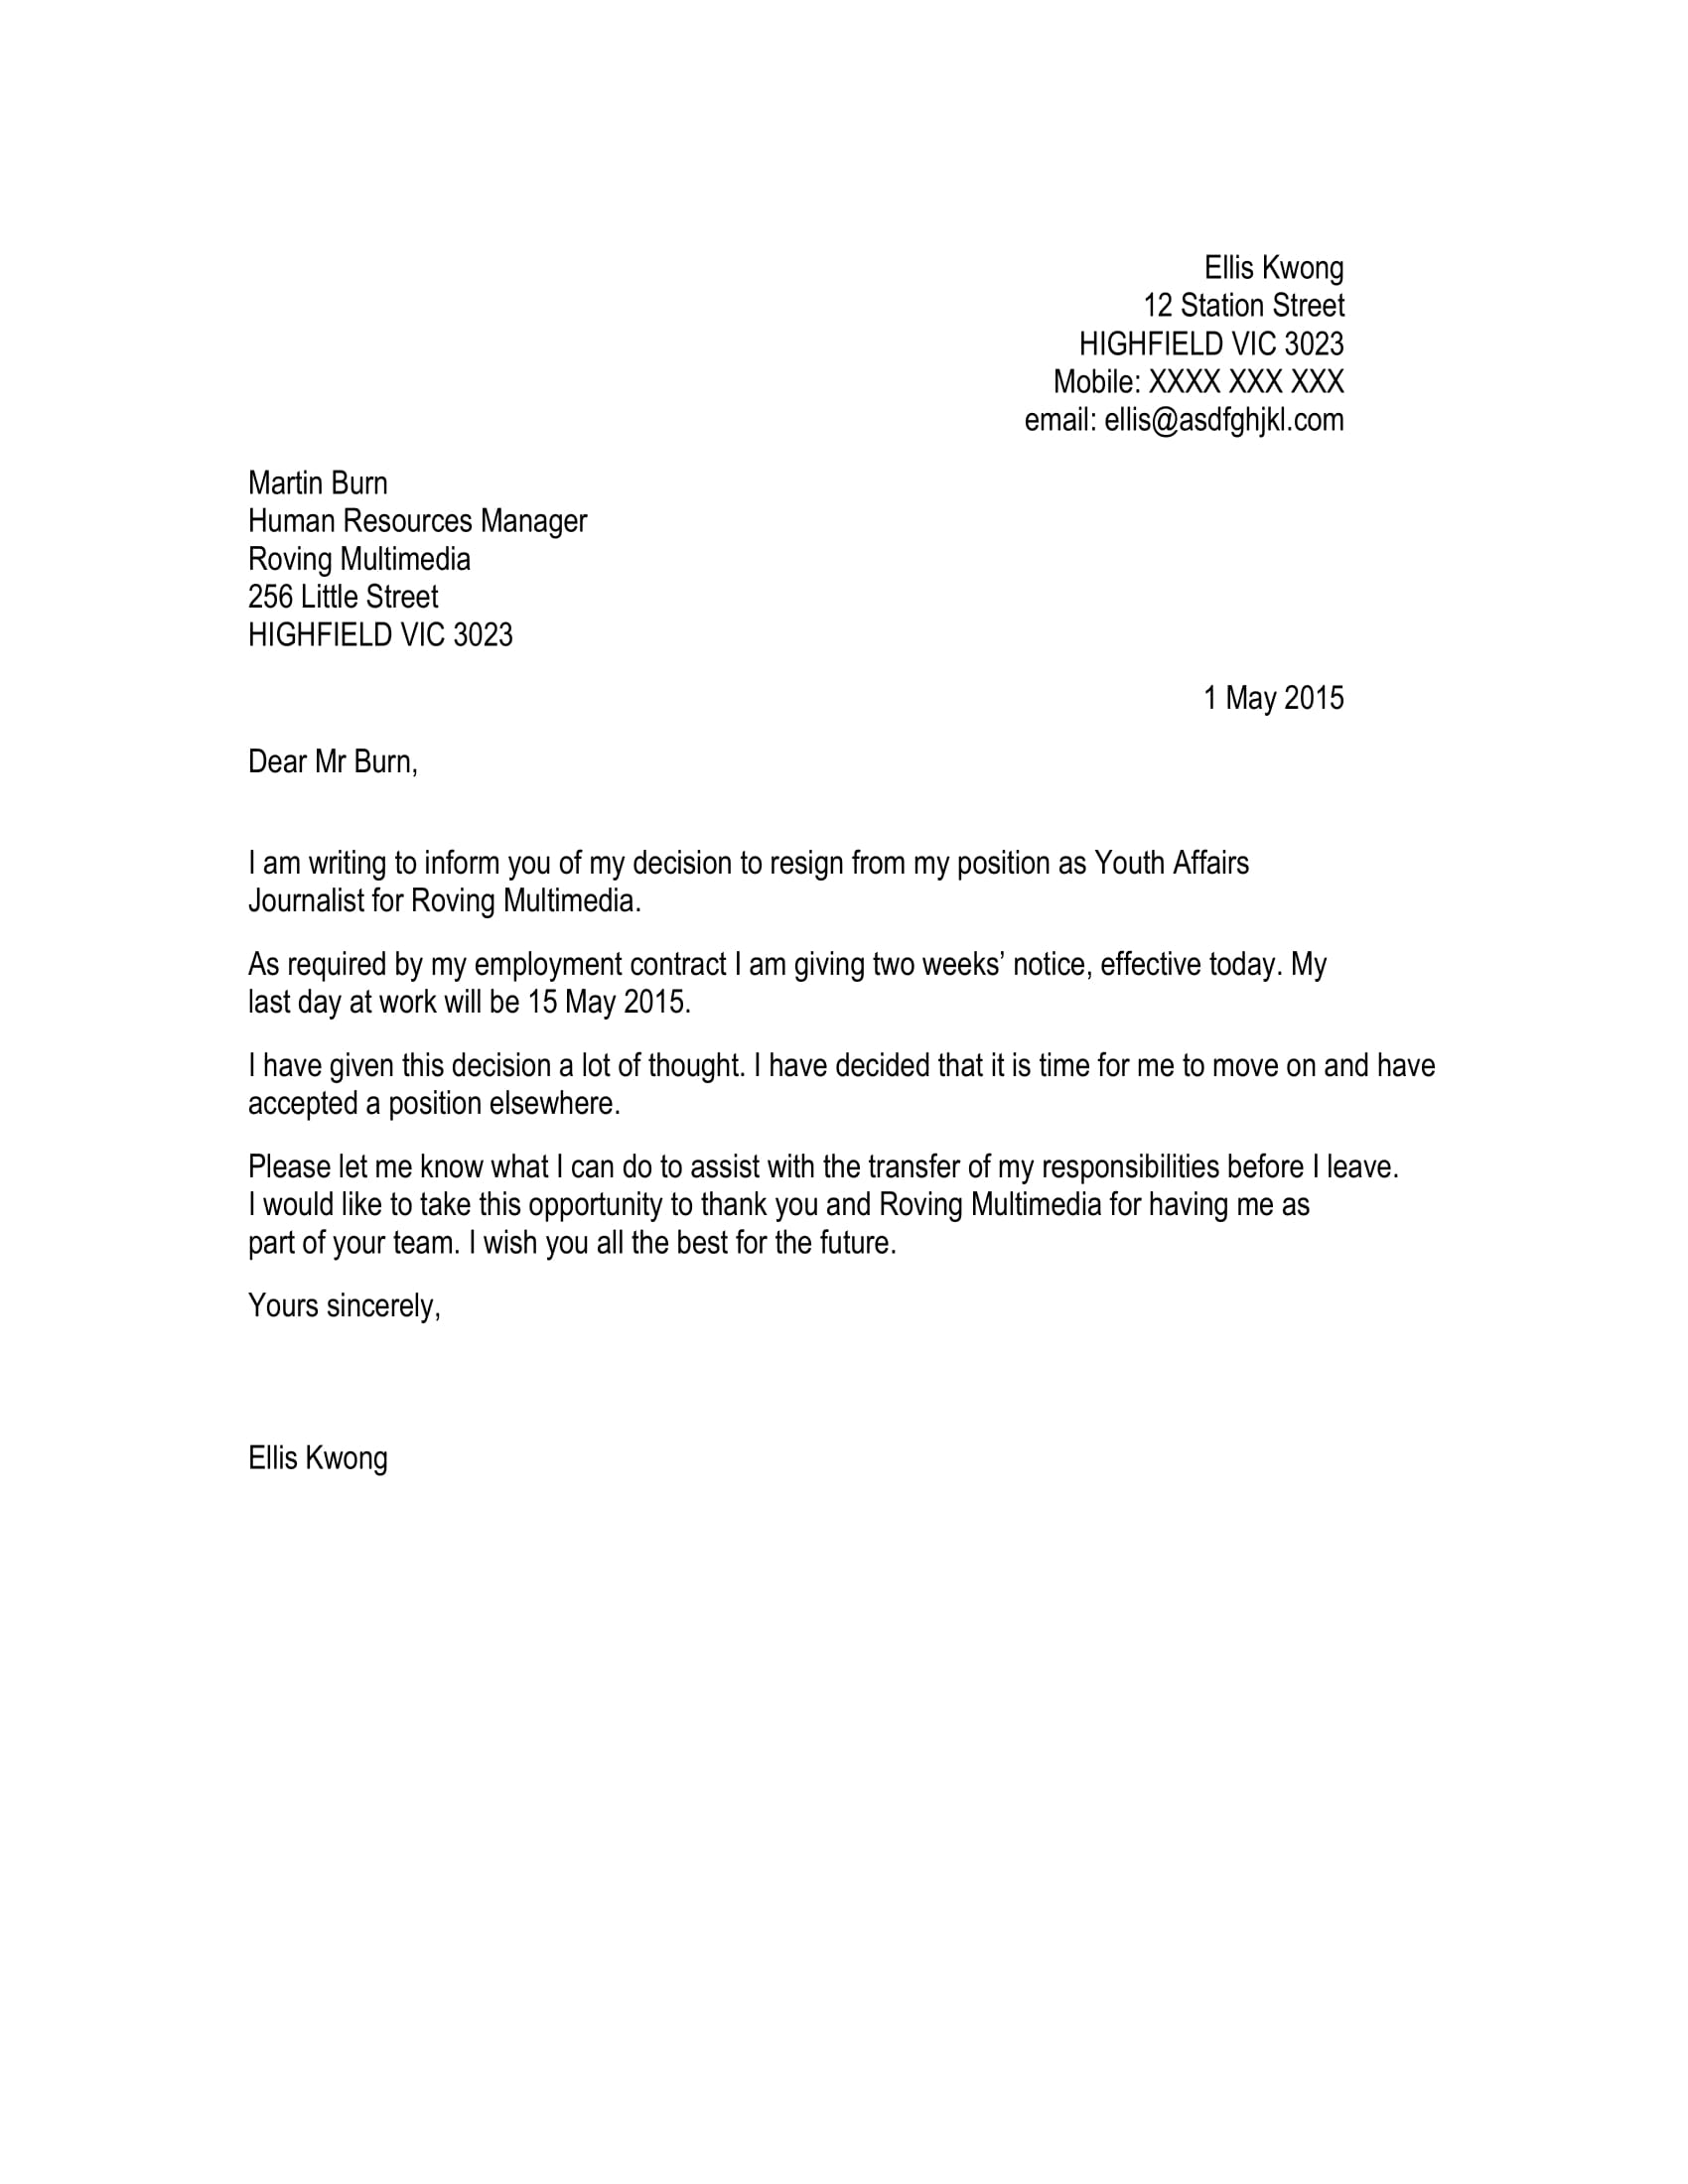 Resign Letter Short Notice from images.examples.com